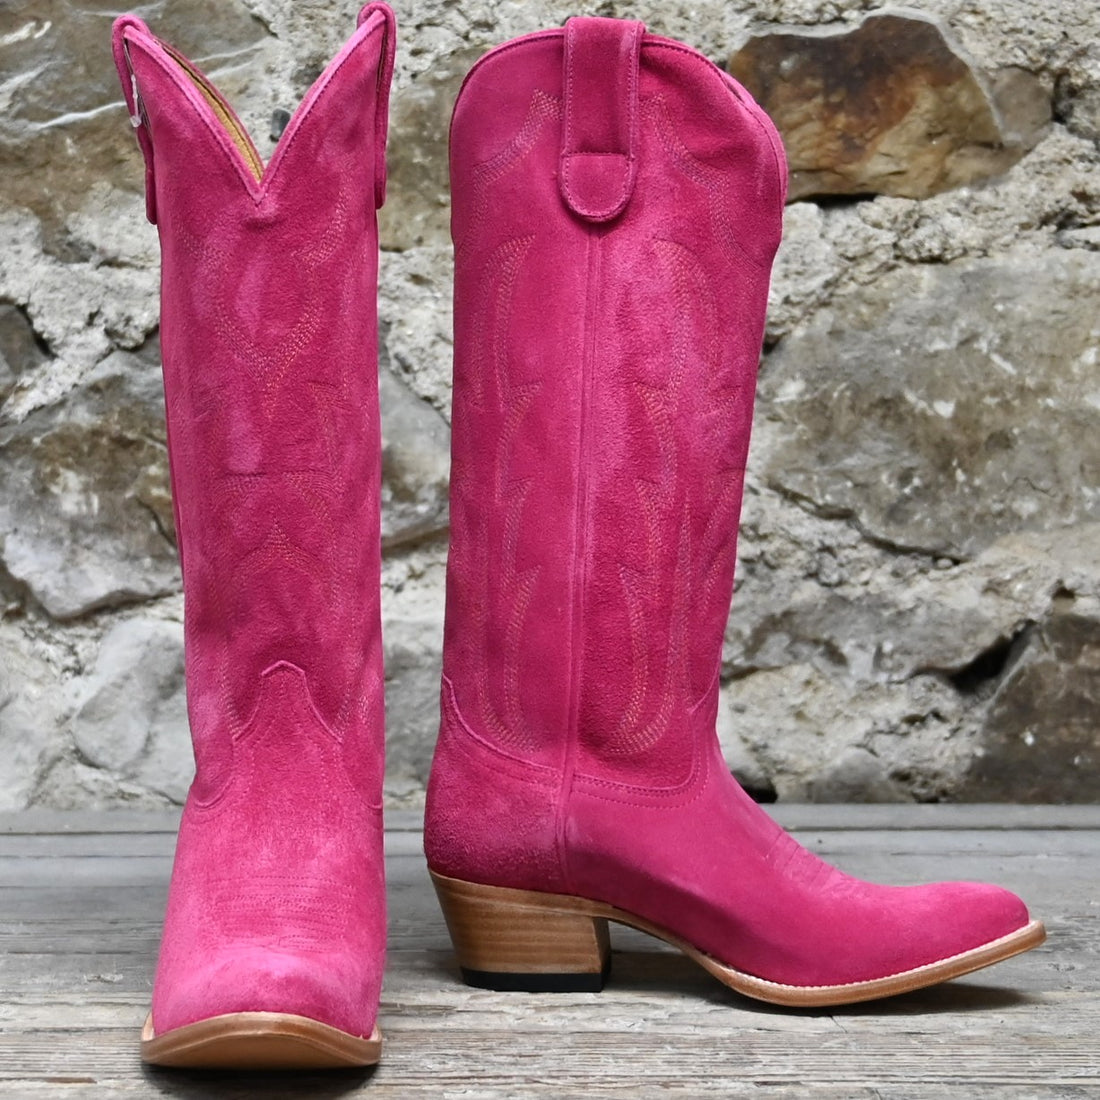 Macie Bean If Karlee were a Cowgirl Boots in Hot Pink Suede view of front and side